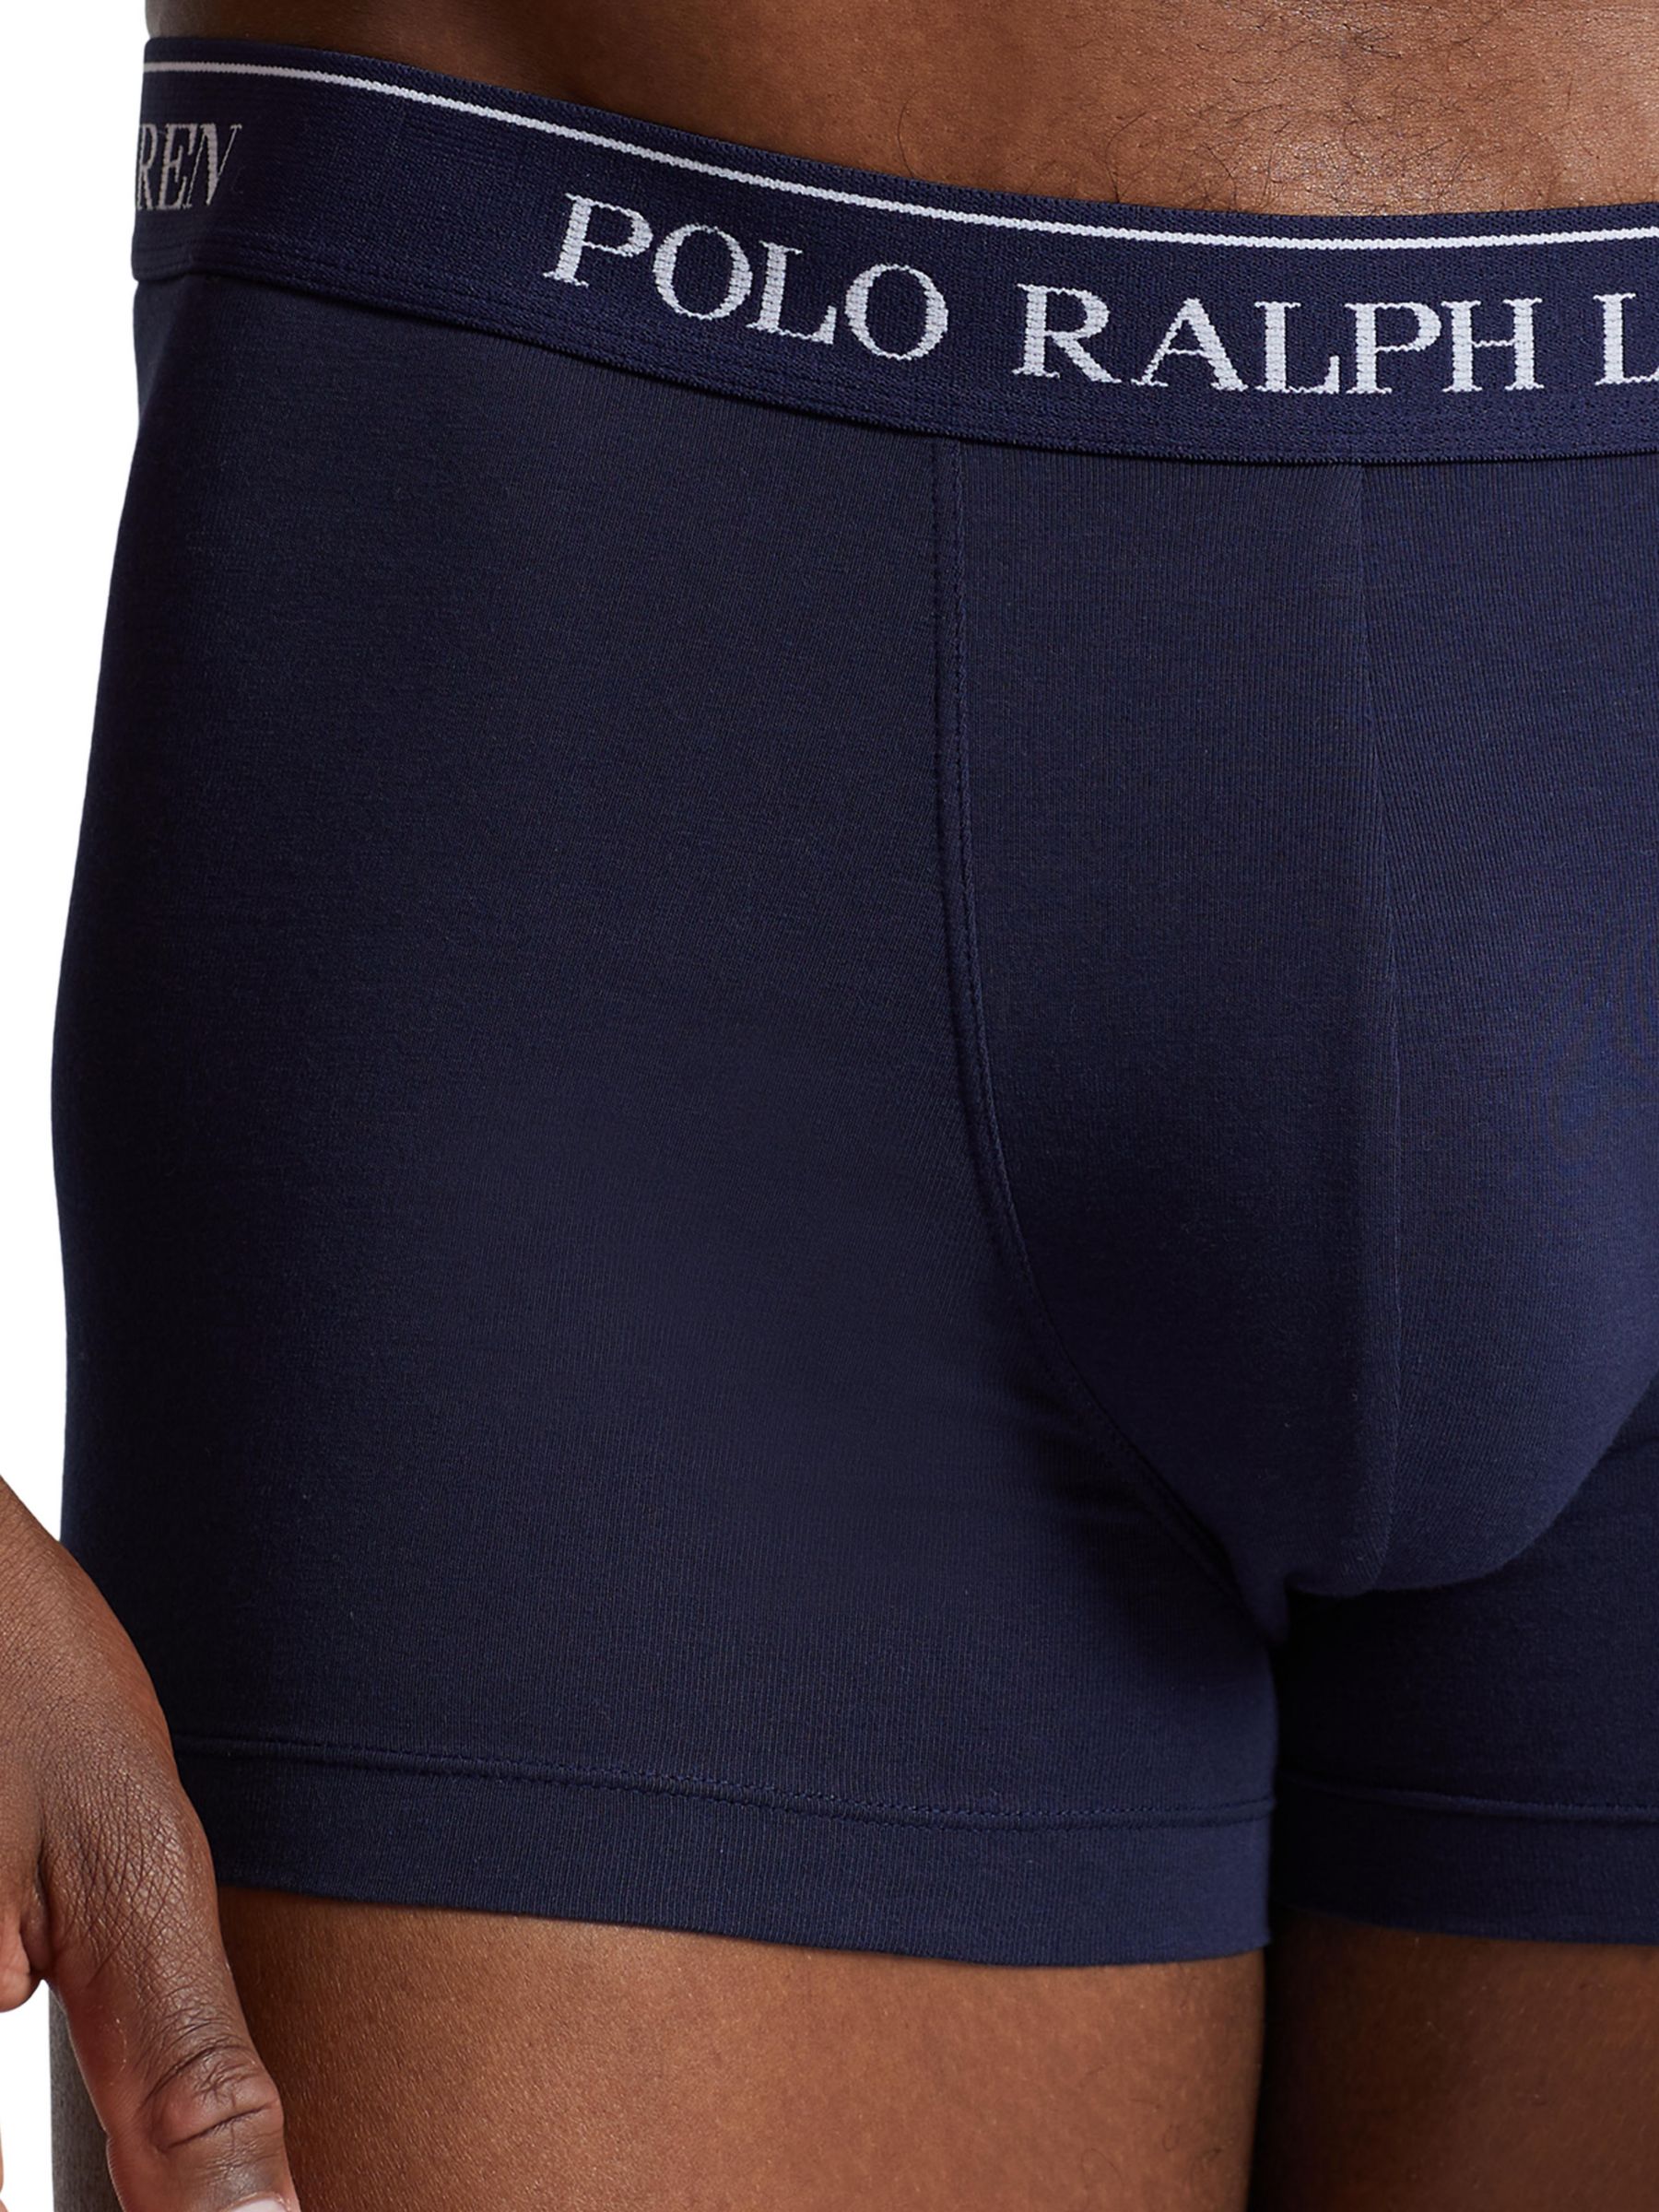 Polo Ralph Lauren Cotton Stretch Trunks, Pack of 5, Blue/Grey/Red Multi, S